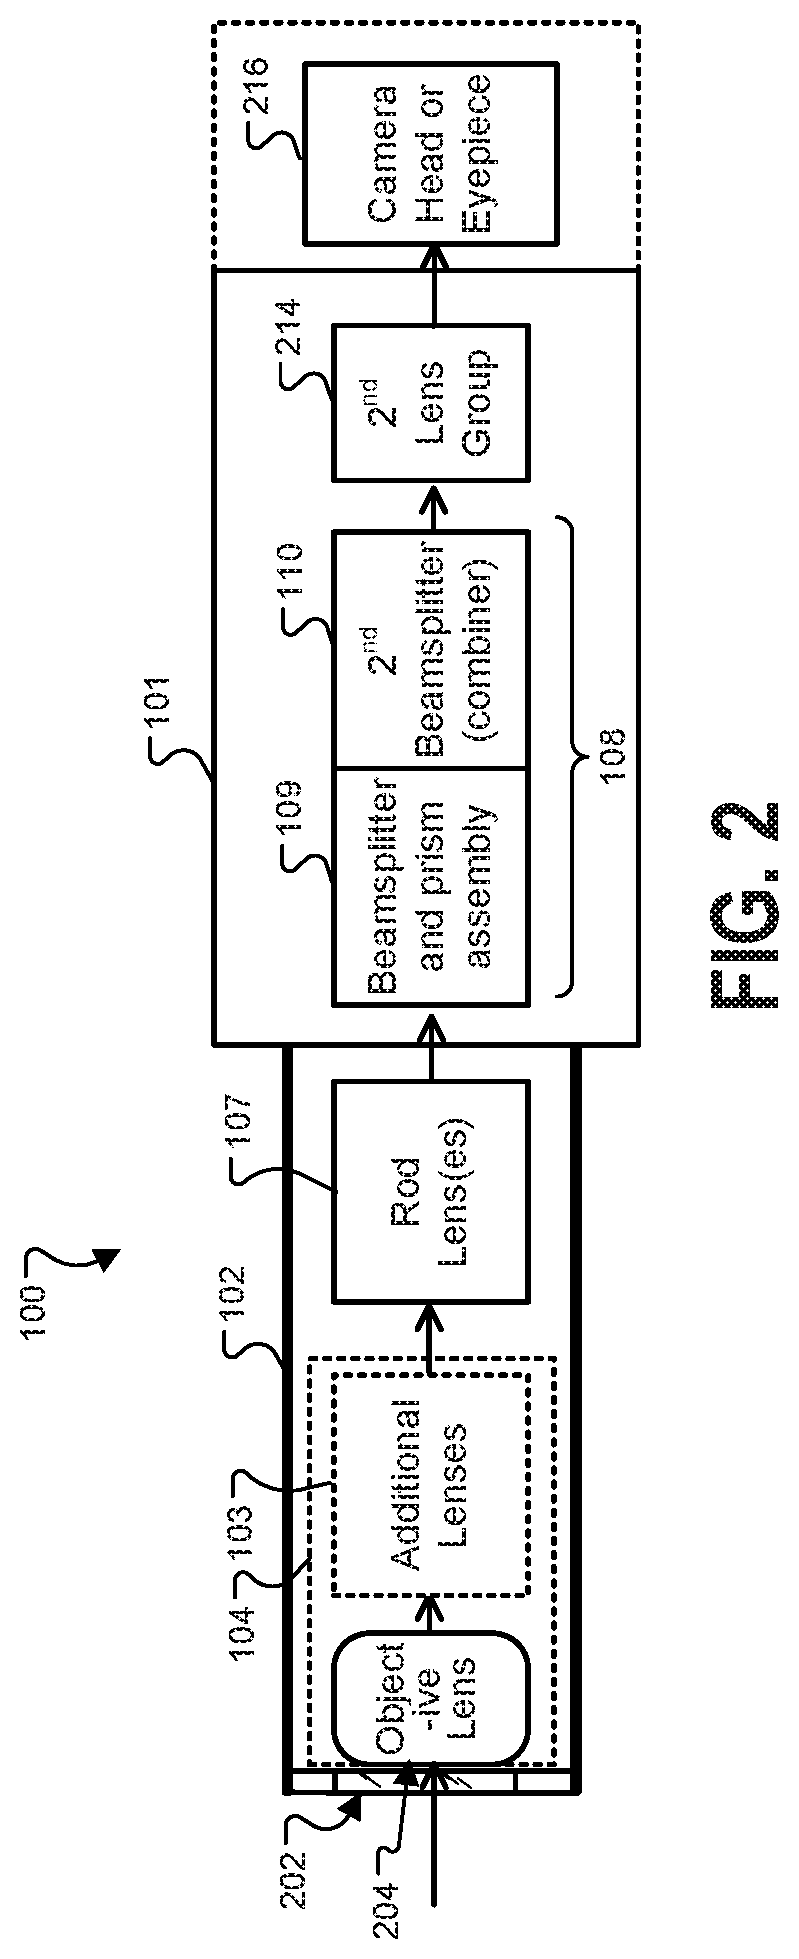 Fluorescence imaging scope with reduced chromatic aberration